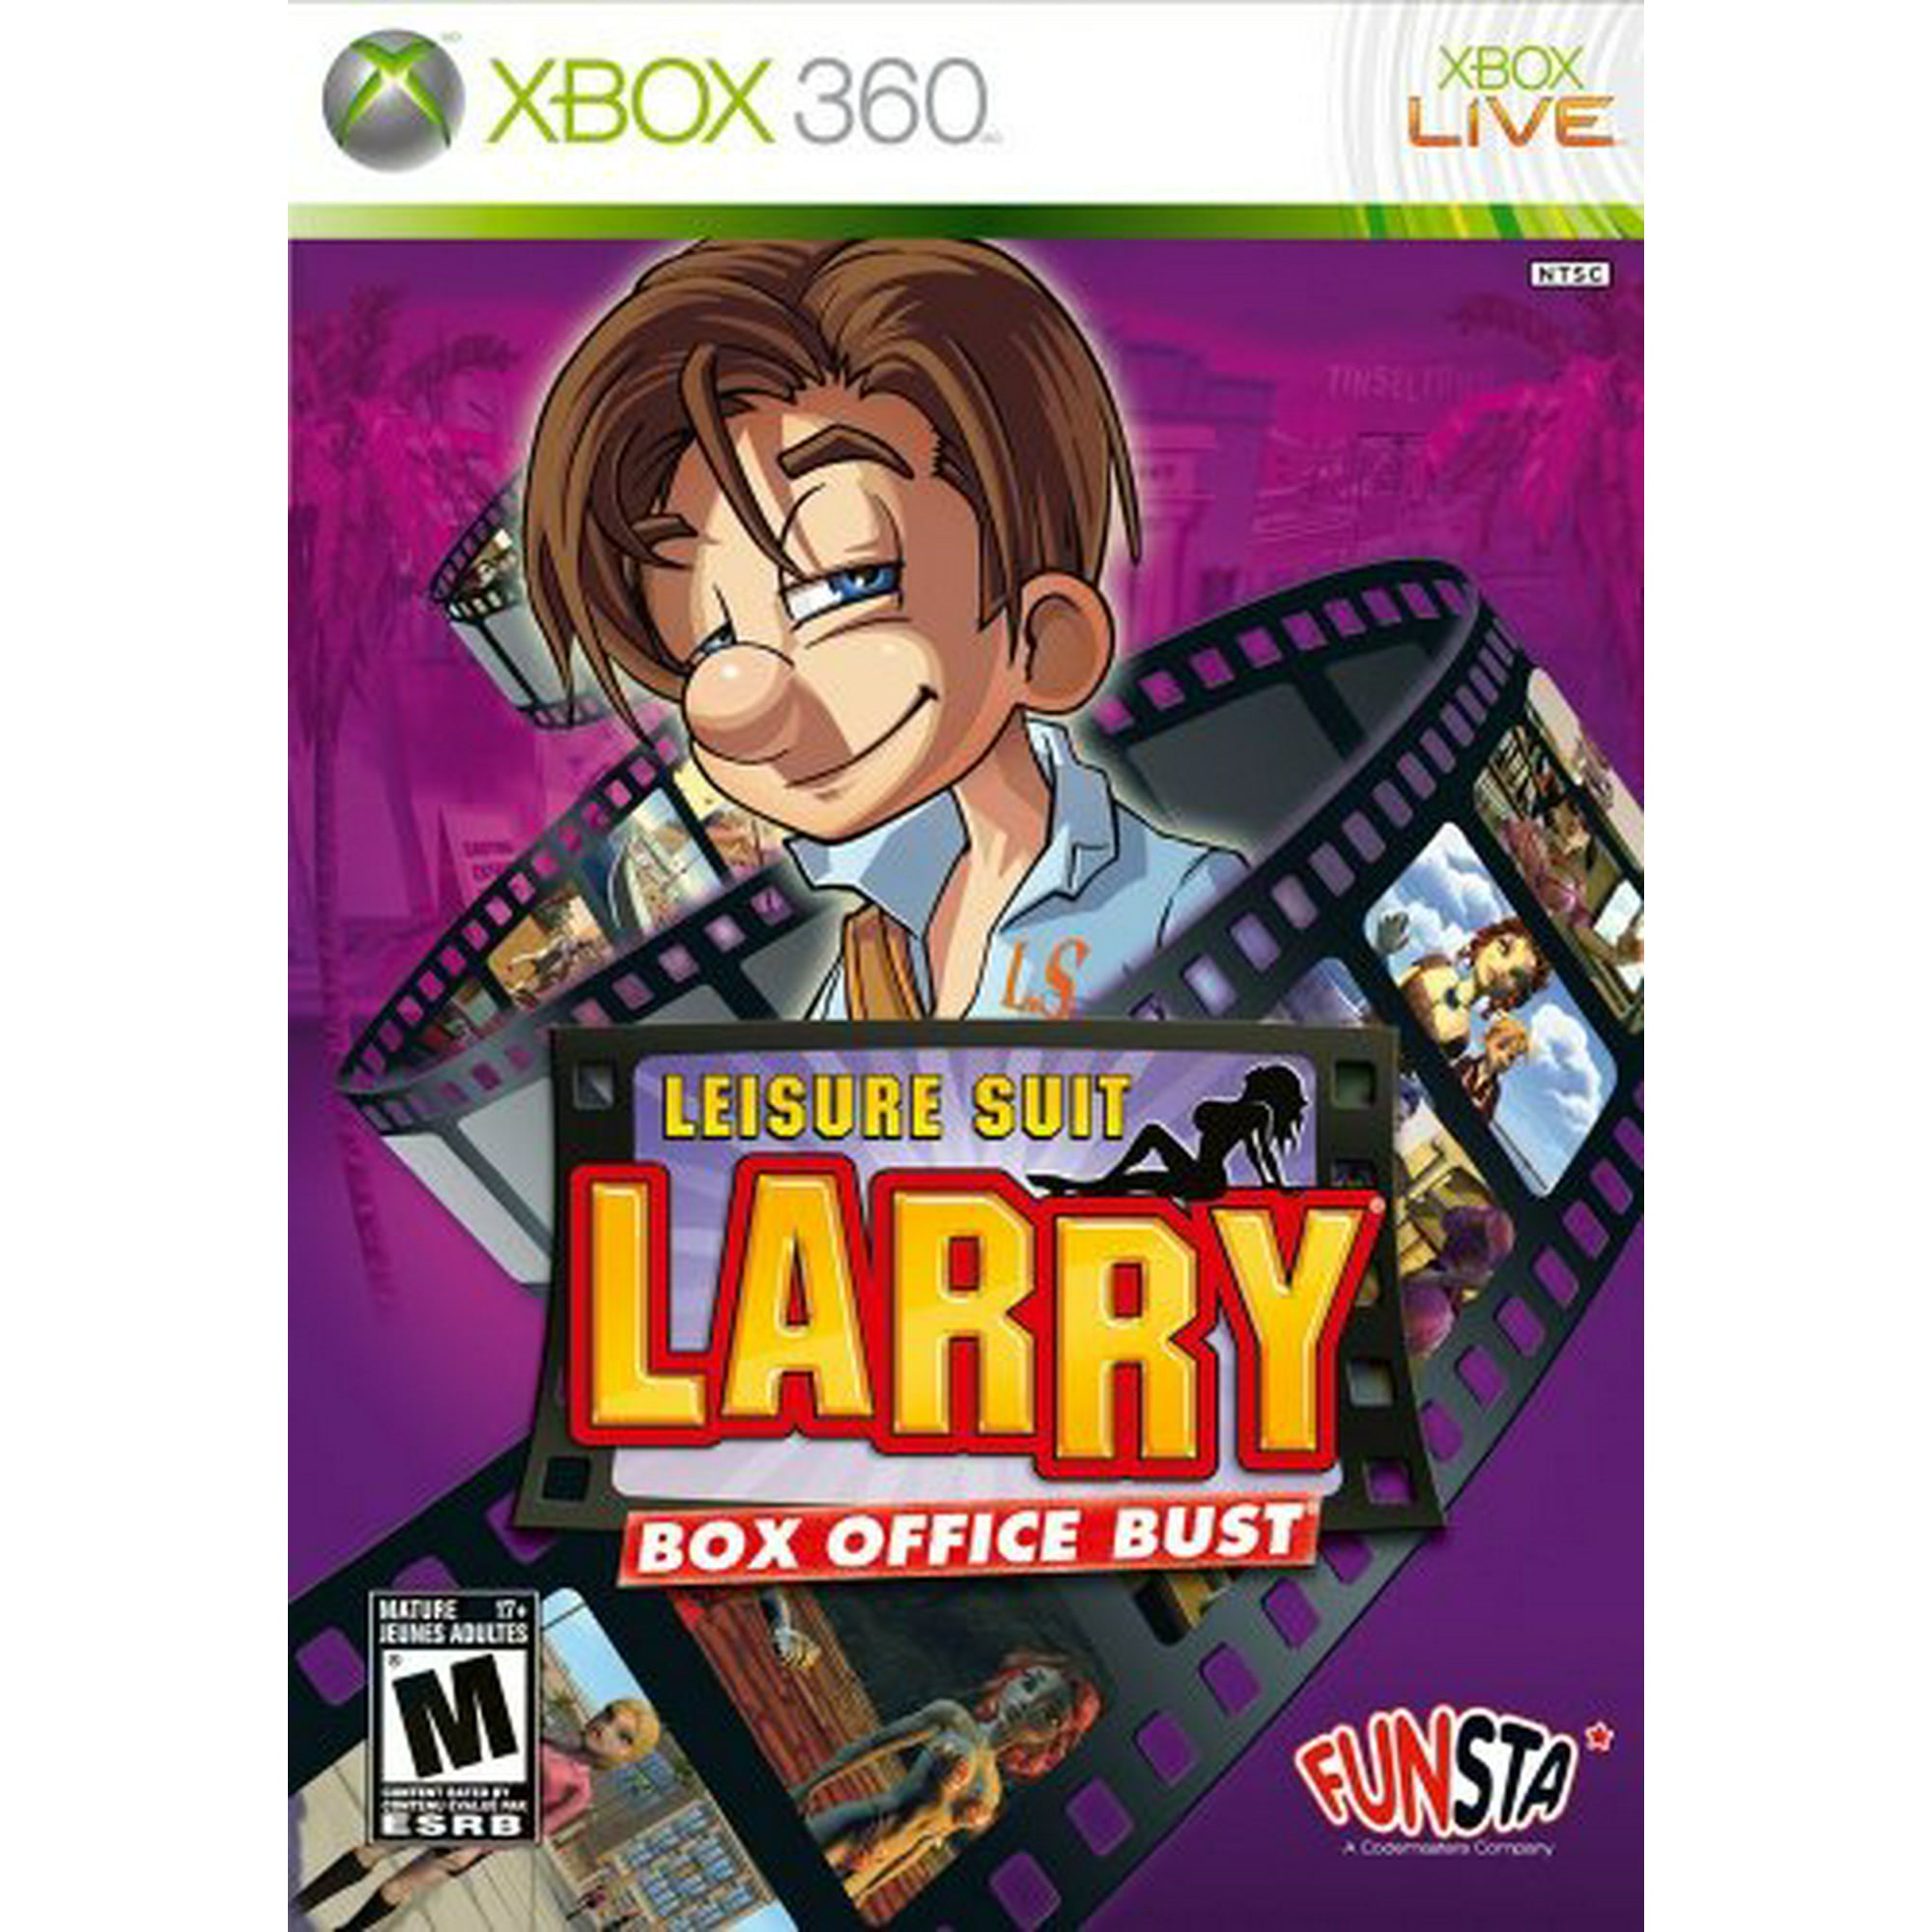 Leisure Suit Larry: Box Office Bust - Xbox 360 | Walmart Canada